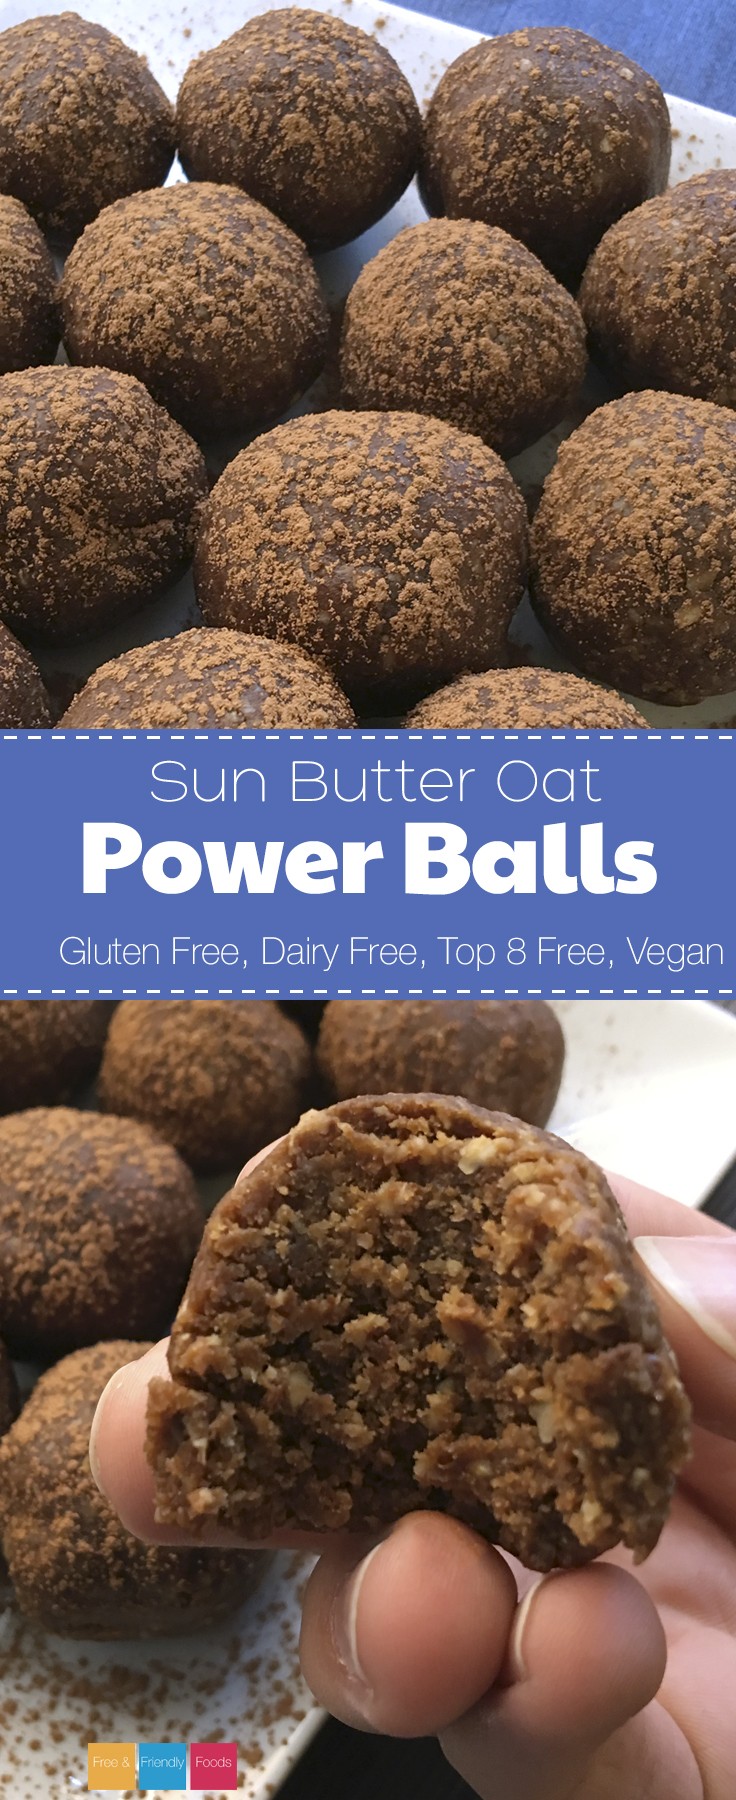 Top 8 Free Power Balls by The Allergy Chef